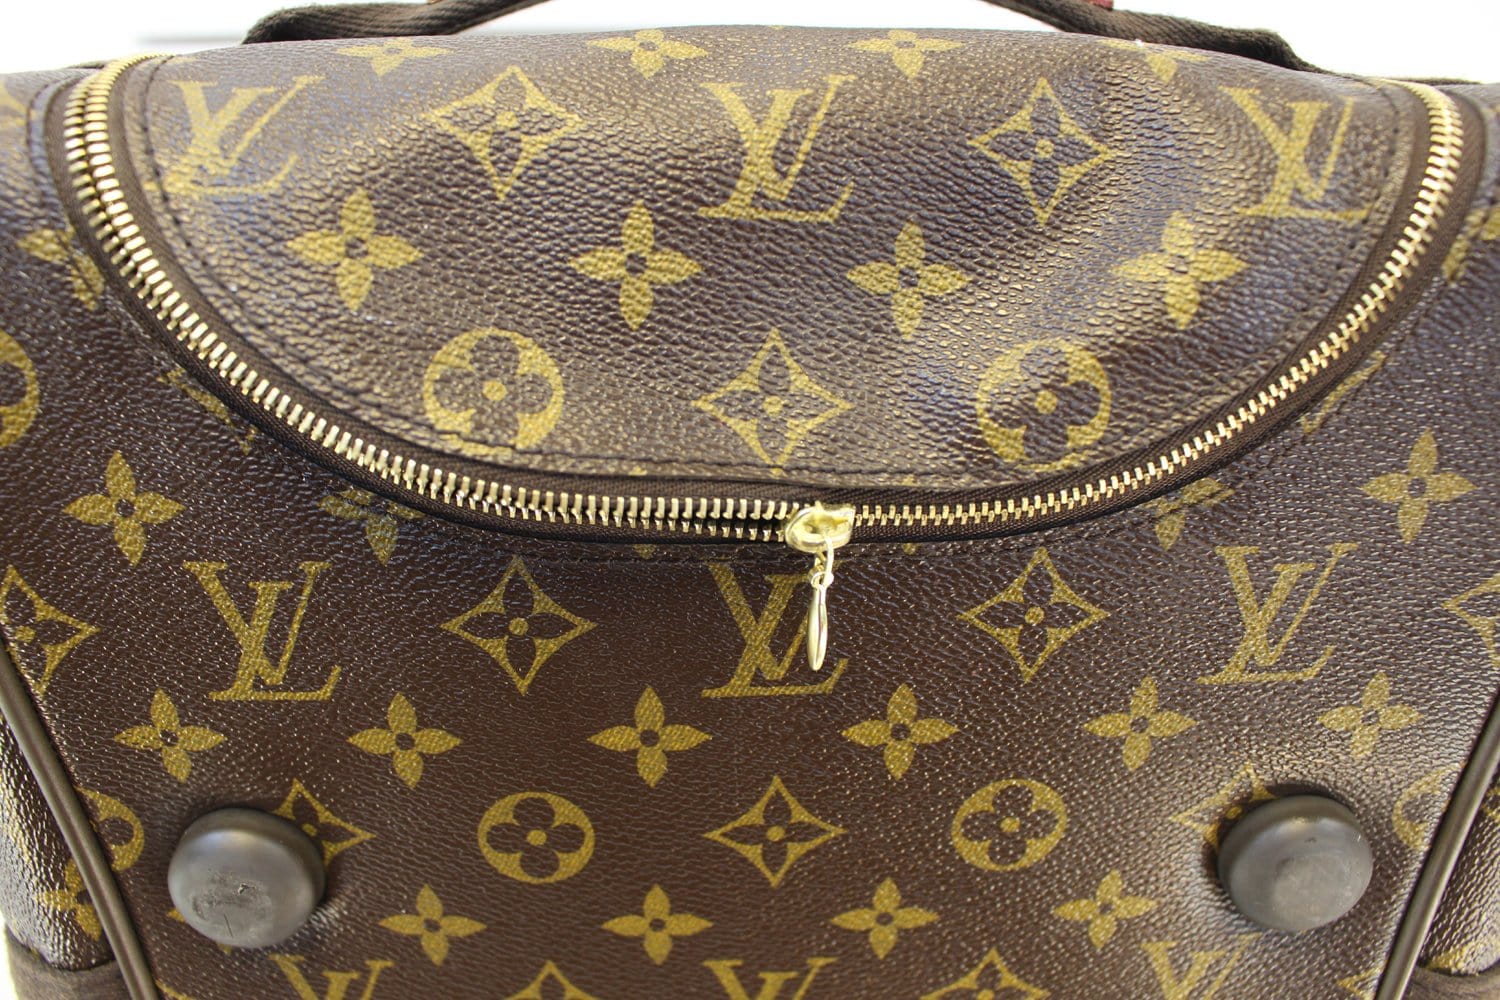 Louis Vuitton Brown Monogram Canvas Neo Eole 65 Rolling Luggage